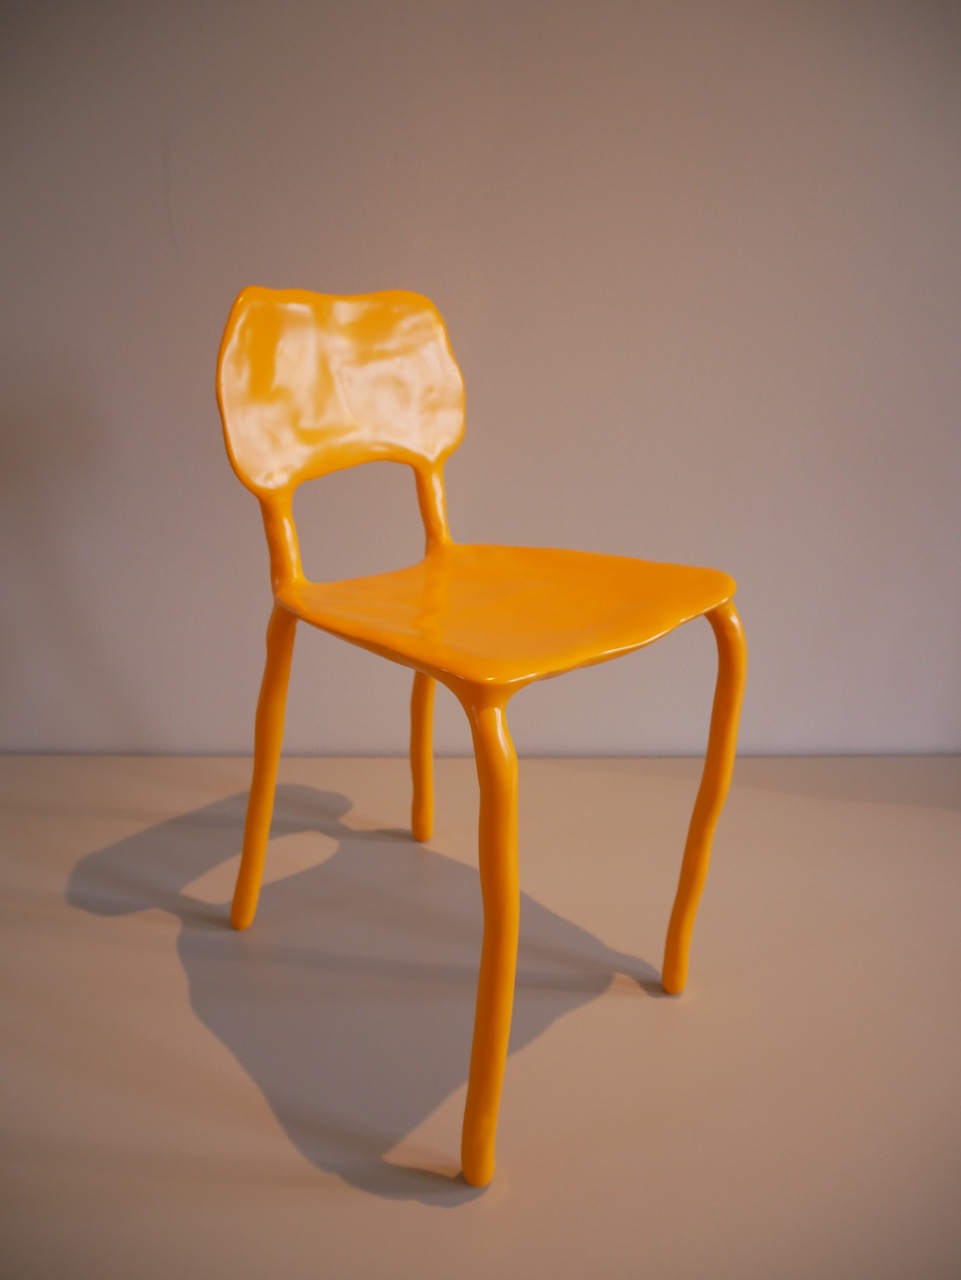 Clay dining chair, yellow